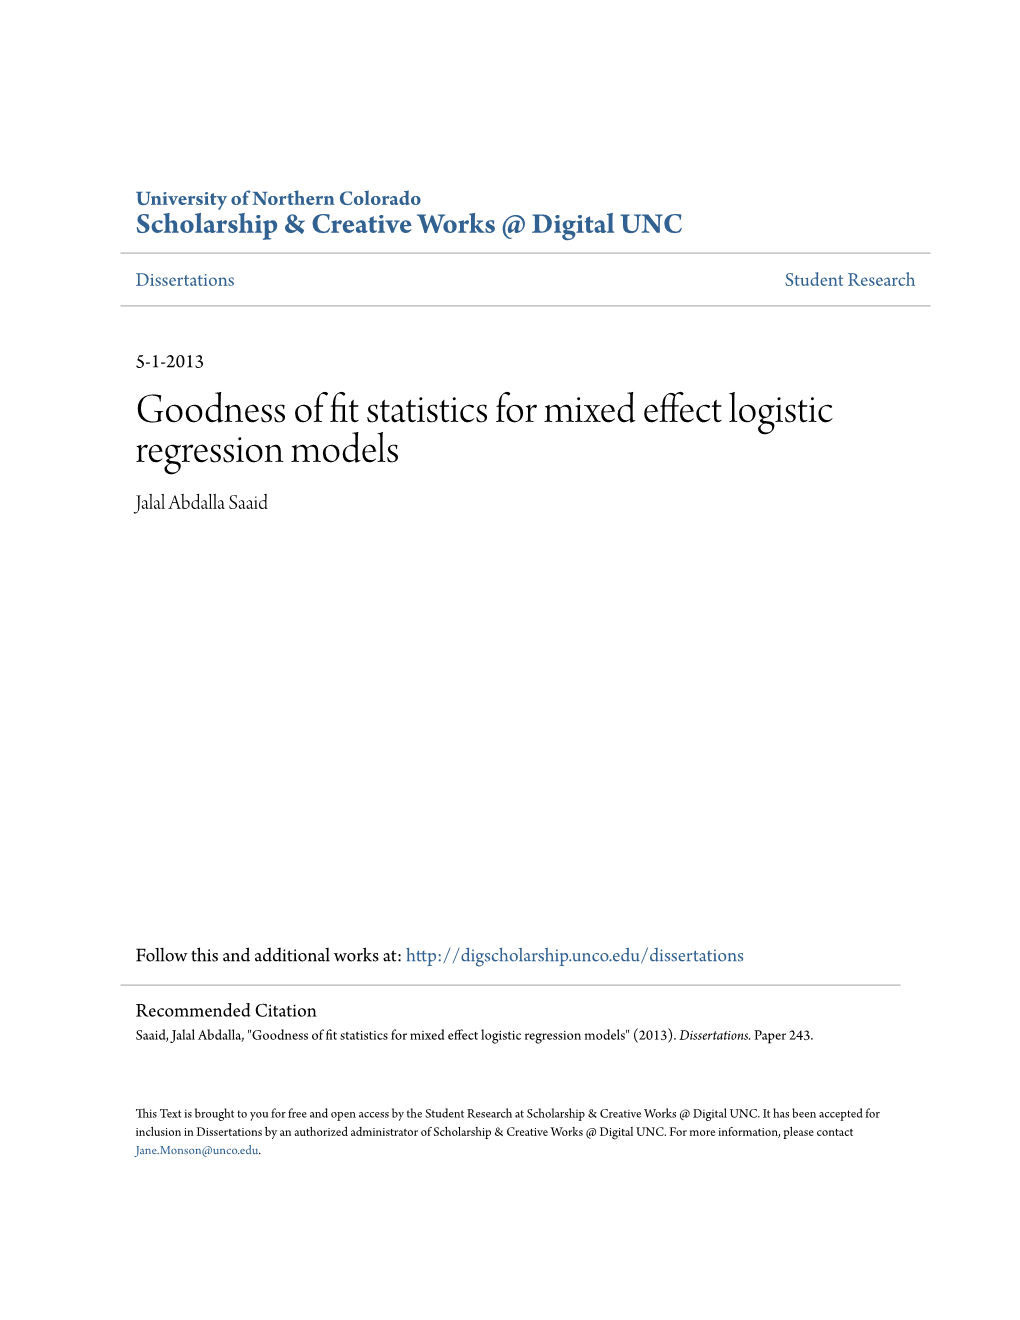 Goodness of Fit Statistics for Mixed Effect Logistic Regression Models